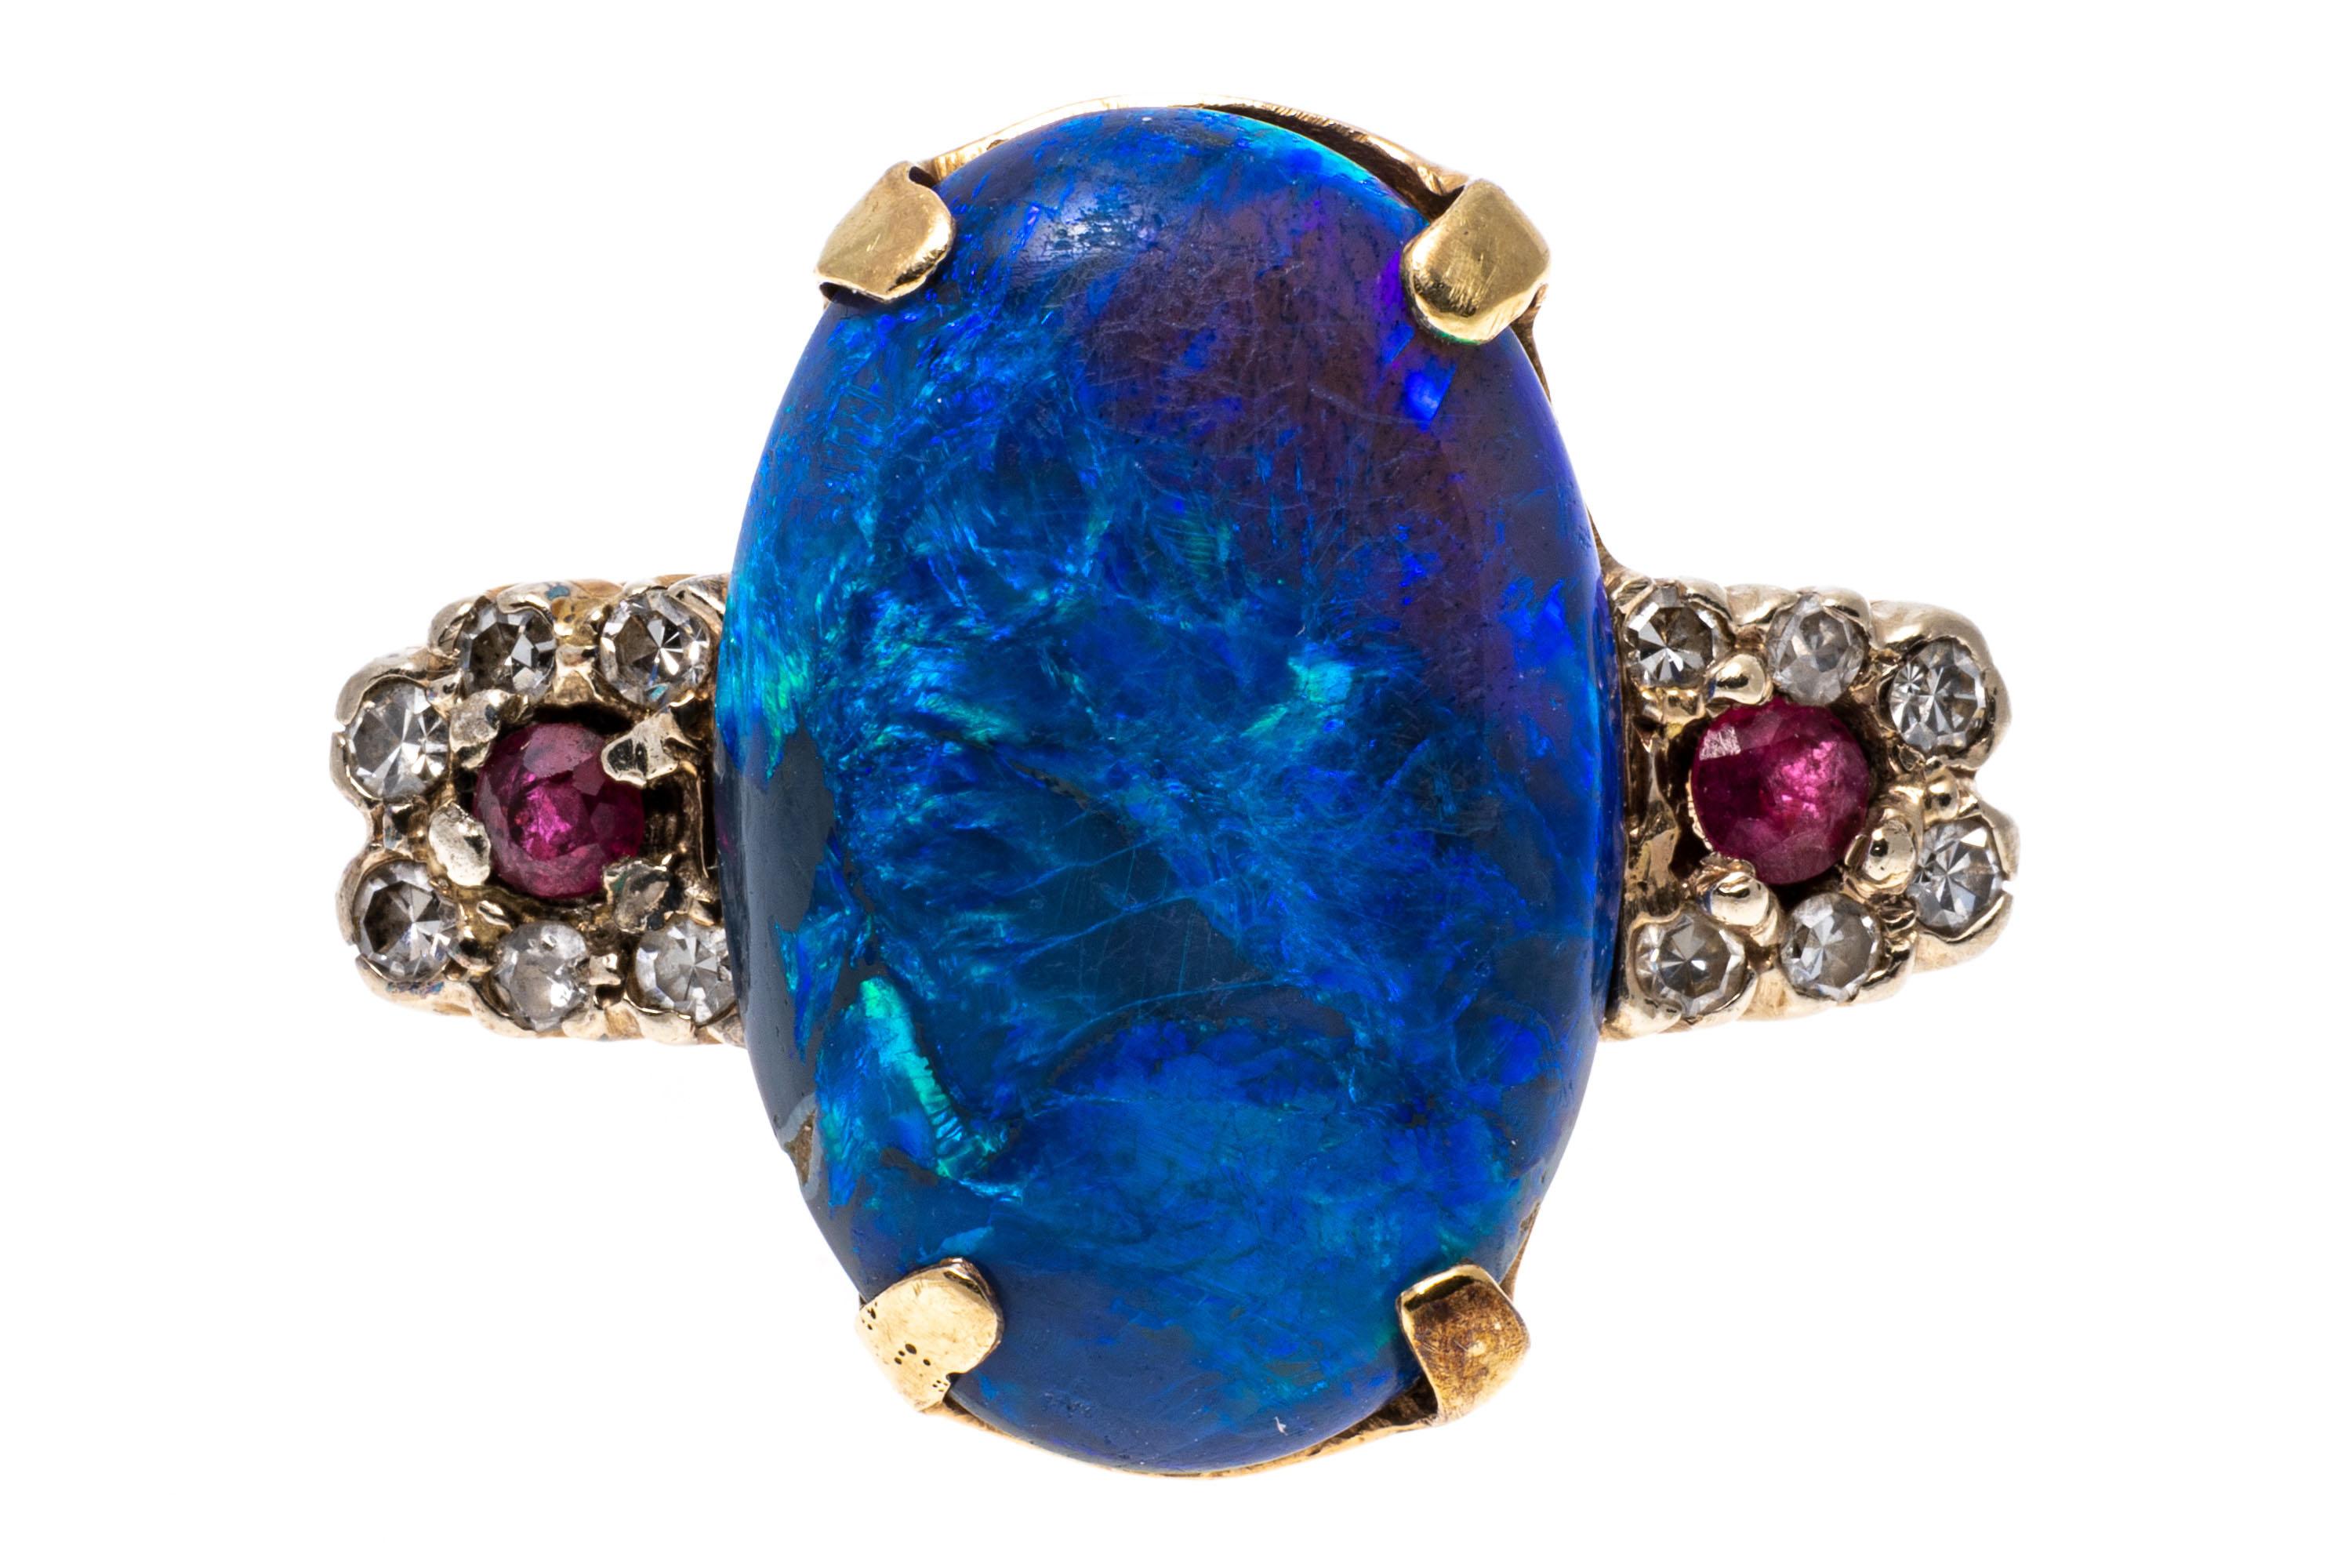 This stunning 14k yellow gold ring has an amazing long oval cabochon, blue-color black opal 8.16 CTS, prong set, and flanked with two round faceted pinkish red color rubies, approximately 0.10 TCW, framed with round faceted diamonds, approximately